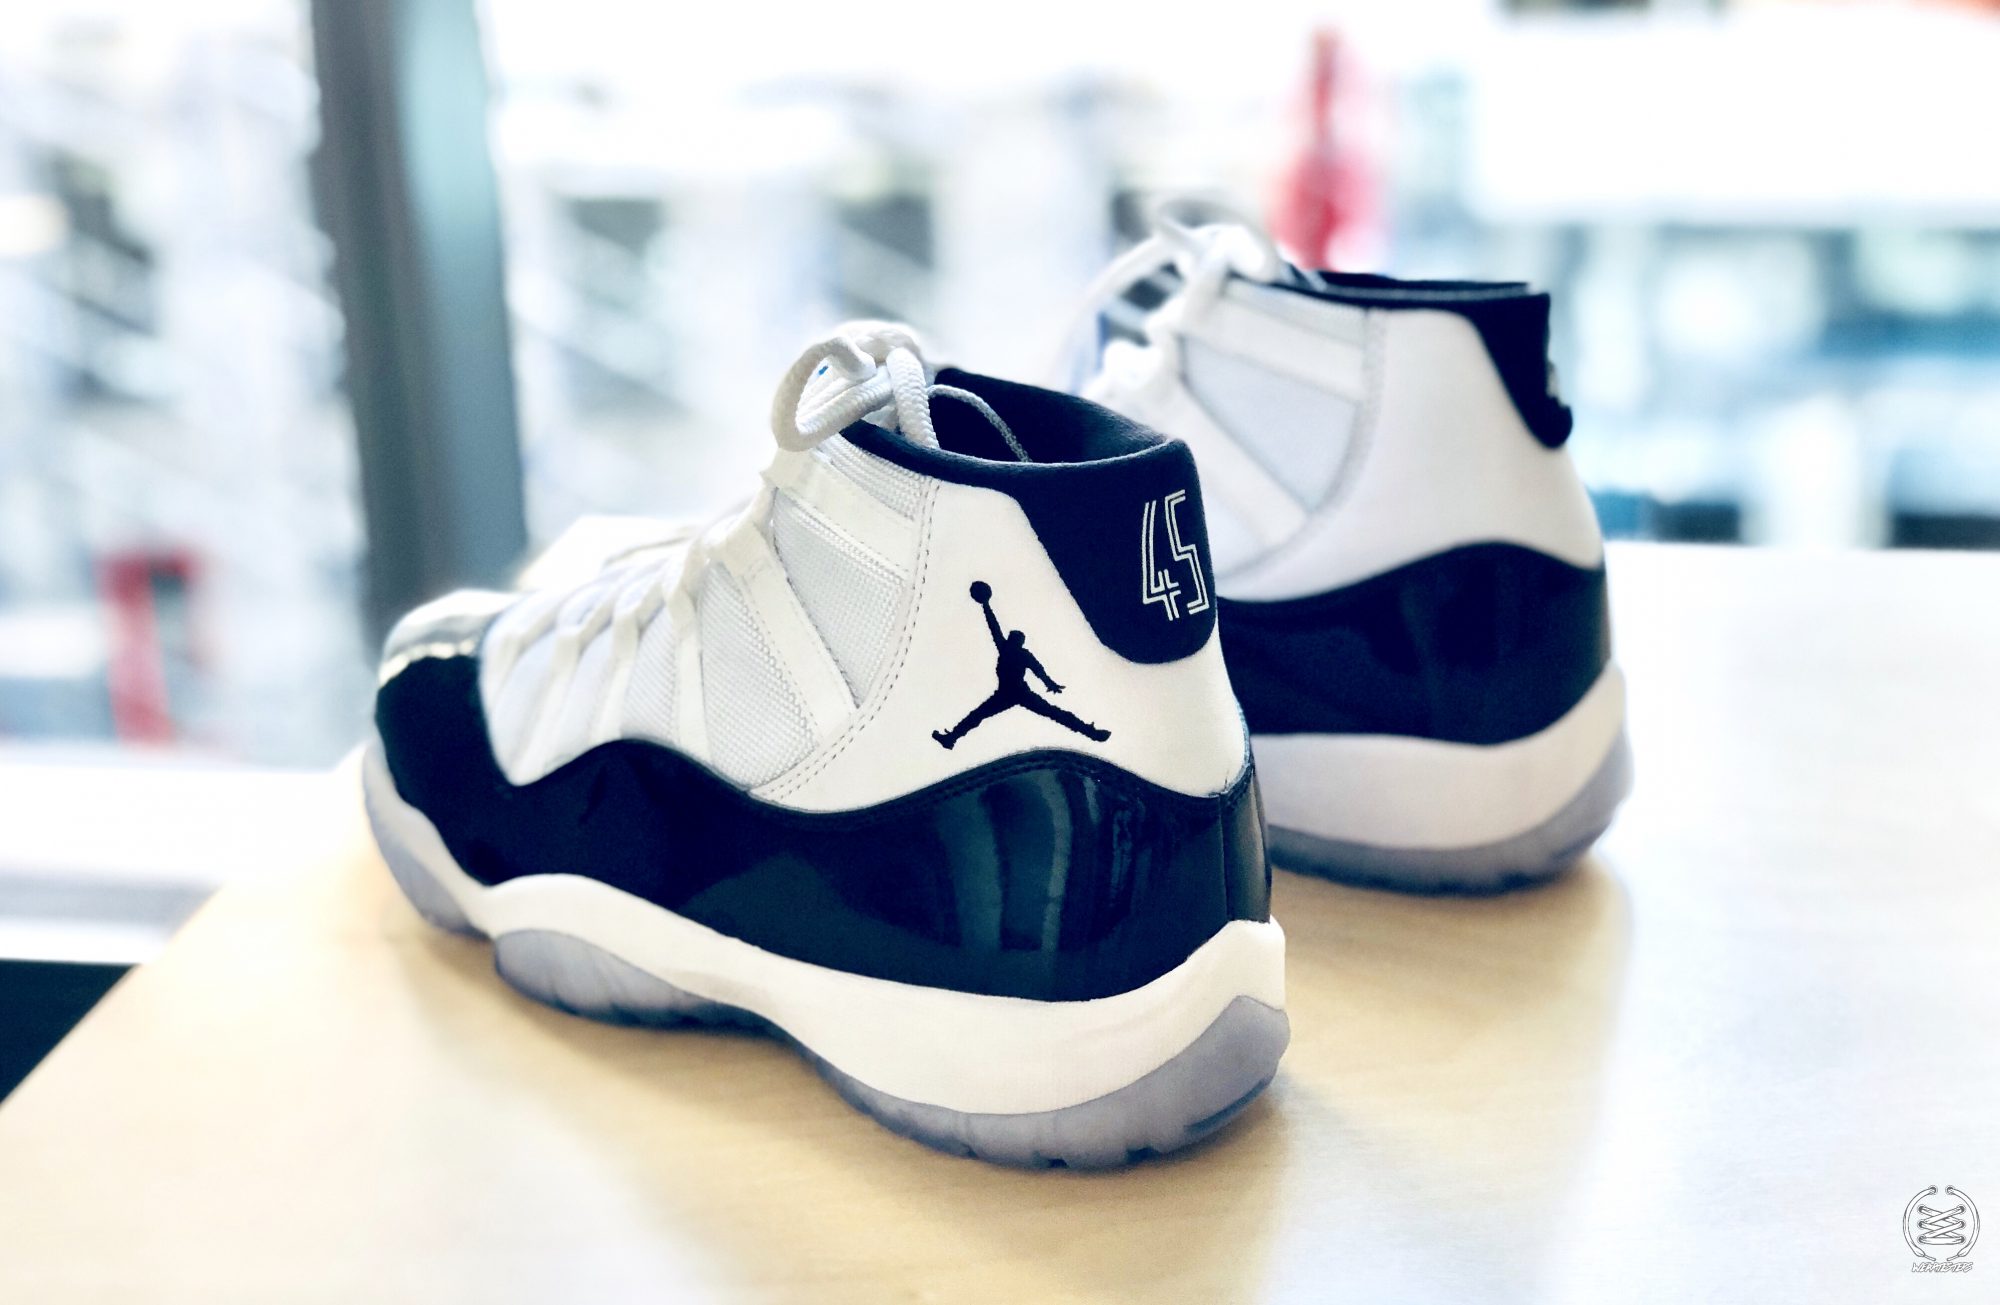 Beauty Shots Of The Air Jordan 11 Concord For 18 Weartesters